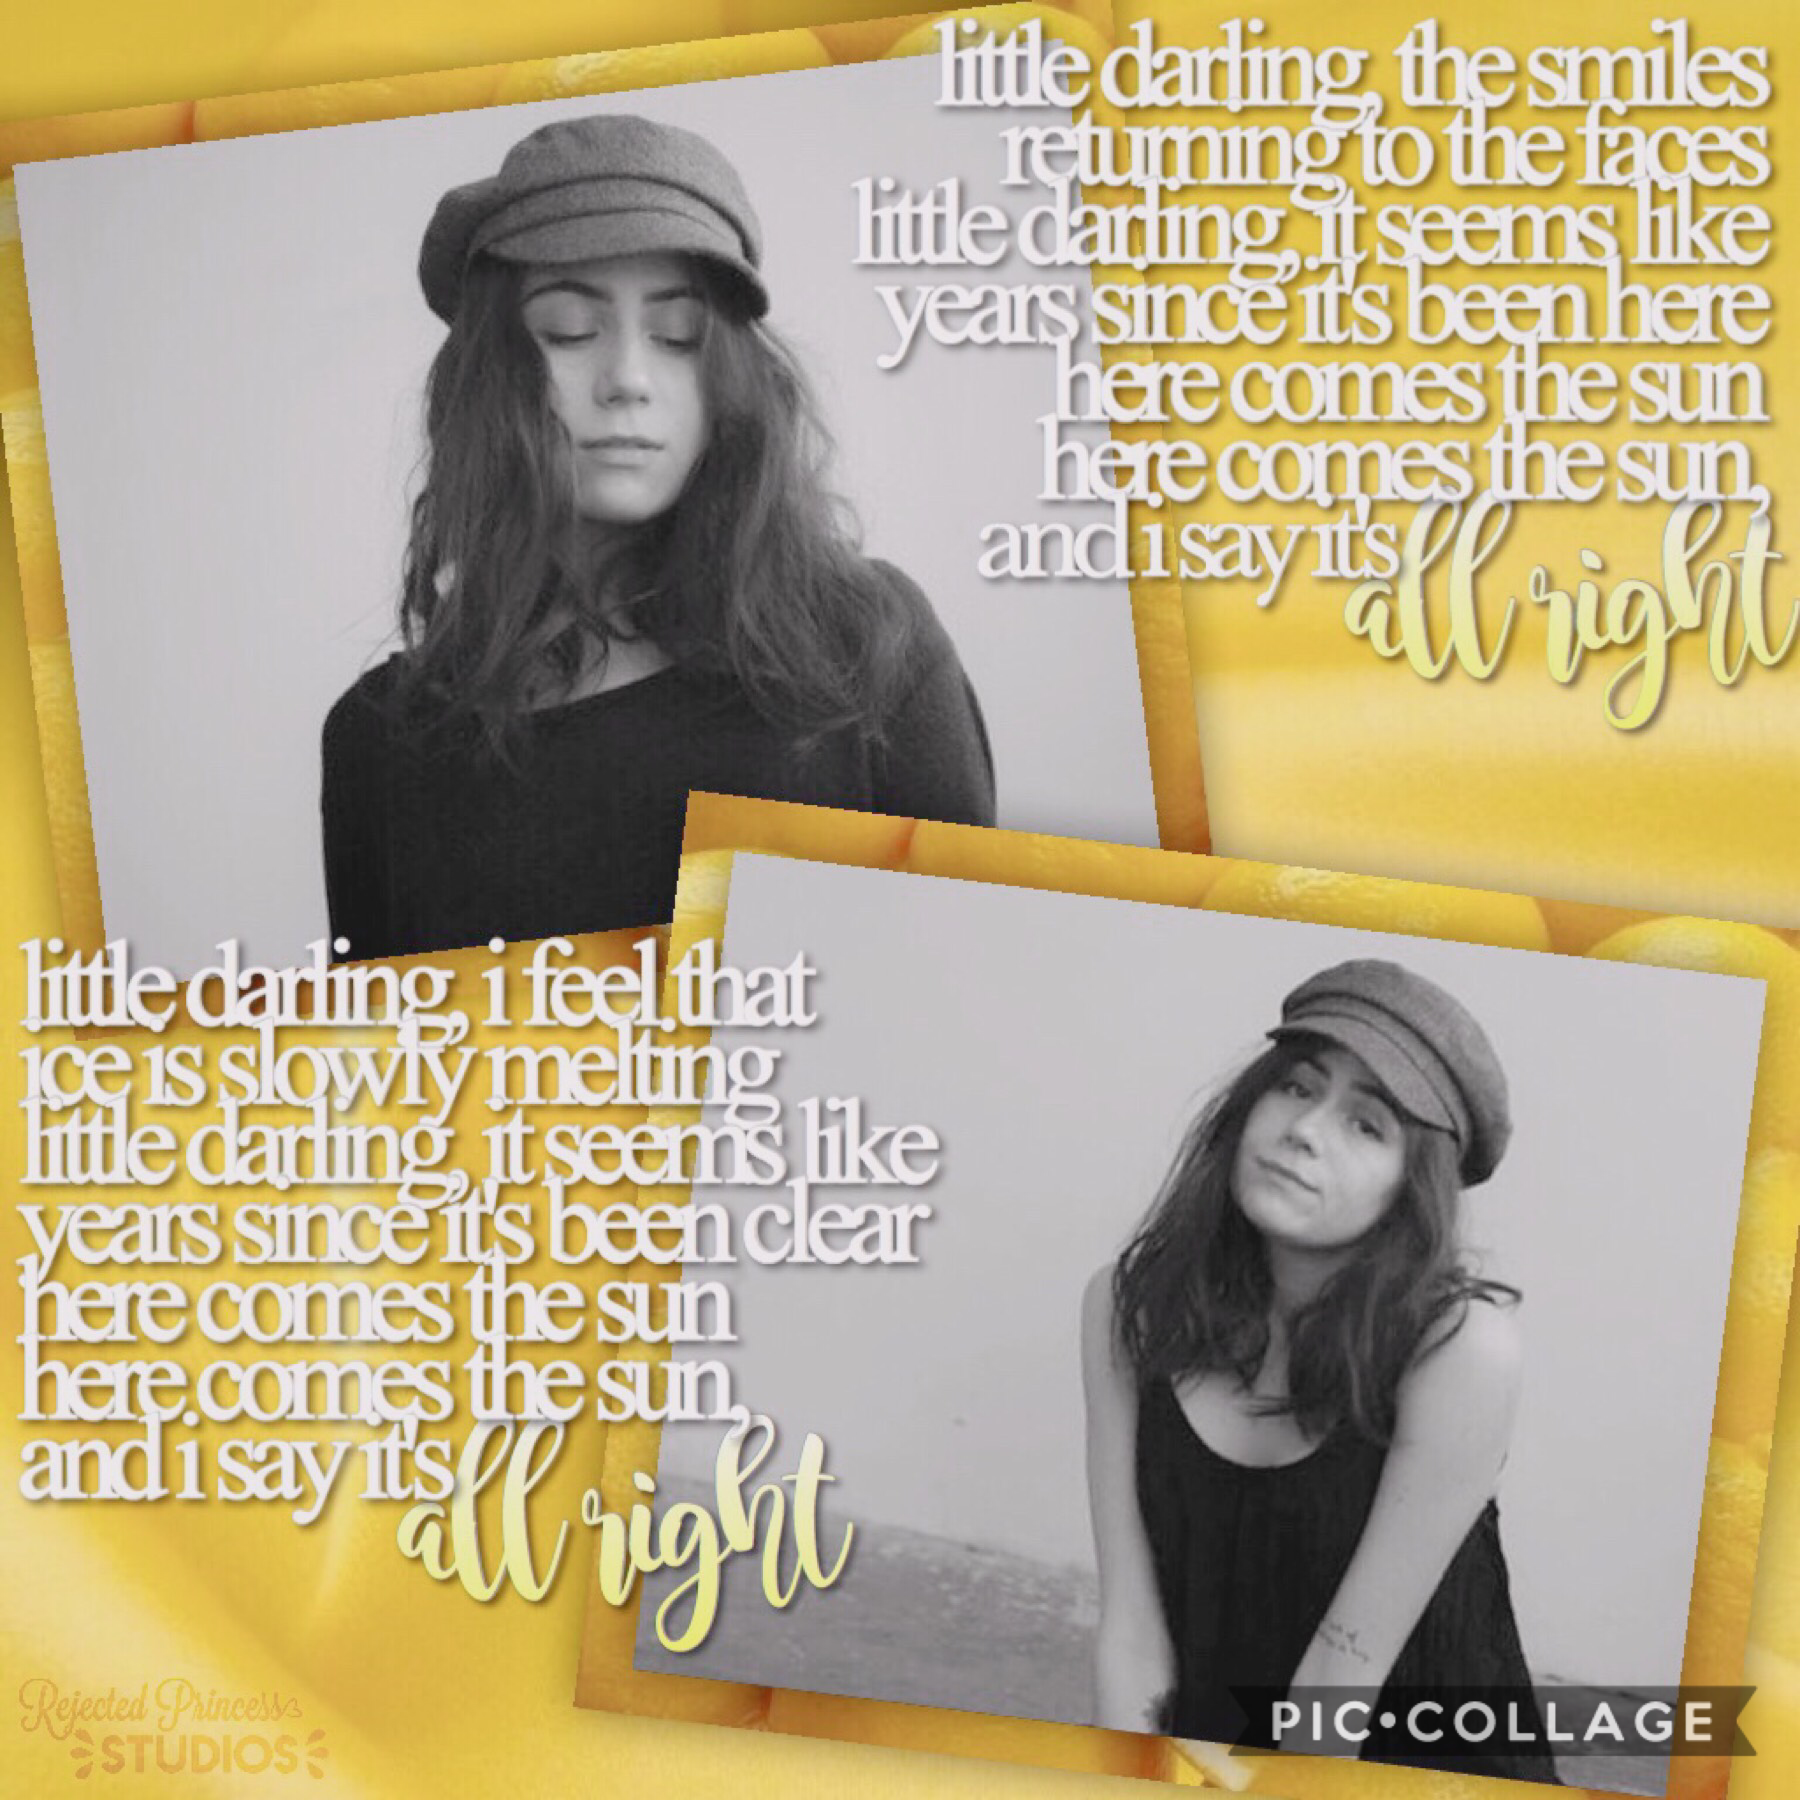 obsessivetbh’s style 💛 here comes the sun by the beatles

i need a lil bit of dodie in my life every now and then... she just lights up the world with her positive words for others.